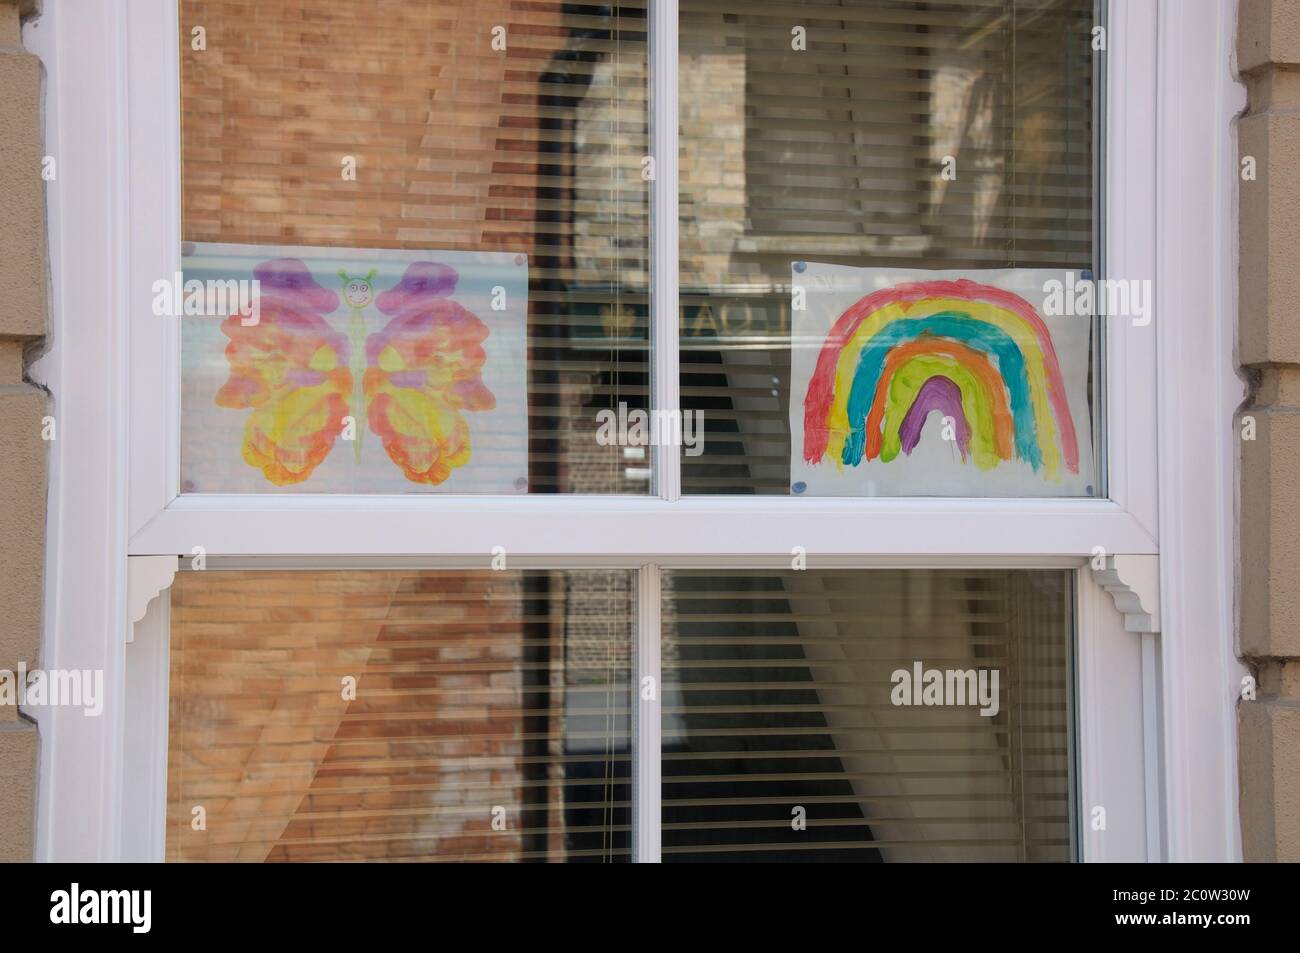 Children’s drawings of a rainbow and a butterfly, with the message “Stay safe”, displayed in the window of a house. The Coronavirus pandemic. England. Stock Photo